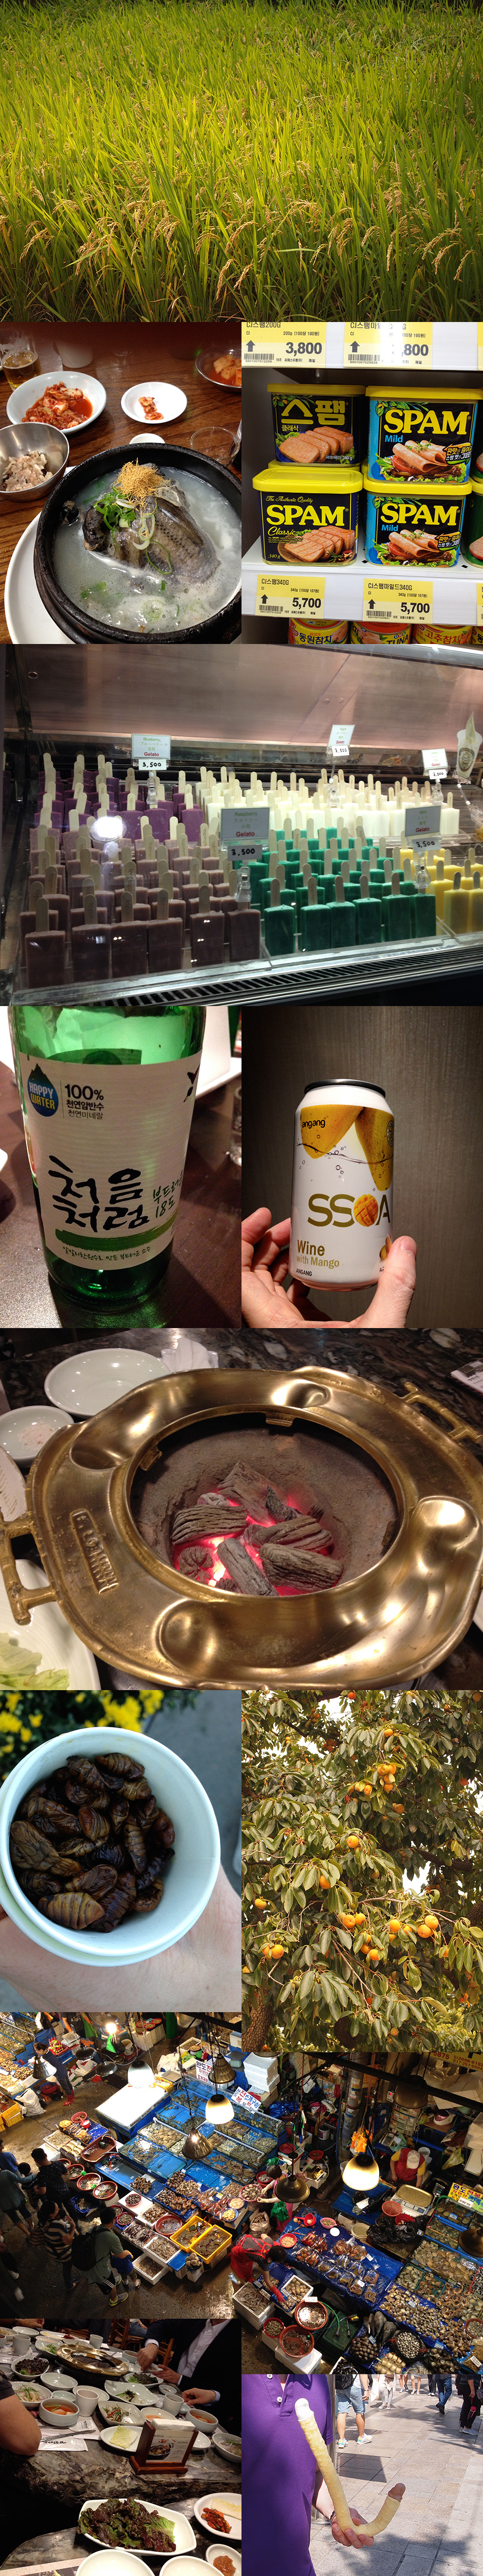 Eat & drink in Korea - from top to bottom, left to right: rice, chicken hangover soup with black chicken and wild ginseng (kimchi - see top left image corner), "spam" (canned ham), ice cream in weird colors on sticks, Soju (national drink No.1, a kind of light vodka-y beverage - I like the fact they label it "Happy Water" ;-)), wine with mango (Asia is not really good with wines, no sir!), table coal bbq, silkworm larvae (yumyum), persimon, all kinds of sea monsters at Noryangjin fish market, table bbq with endless amounts of dishes in bowls, and finally: the mysterious double-ended whale-penis icecream :-D